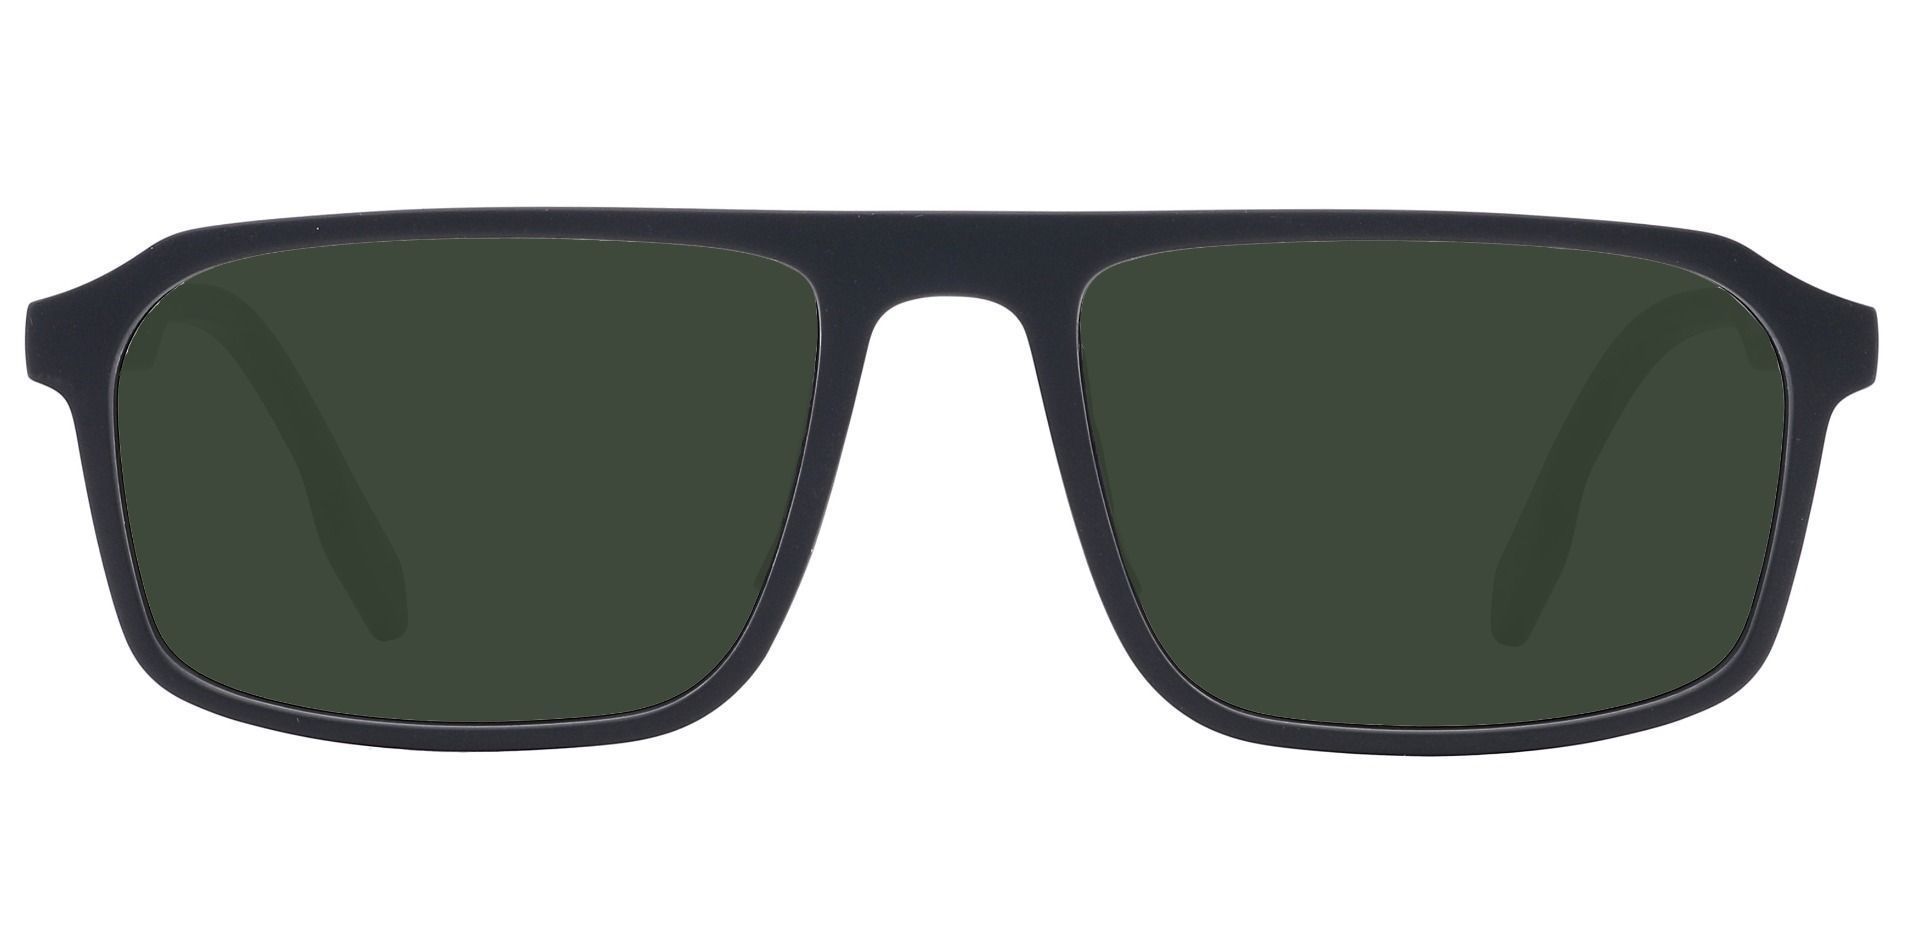 Hector Rectangle Lined Bifocal Sunglasses - Black Frame With Green Lenses